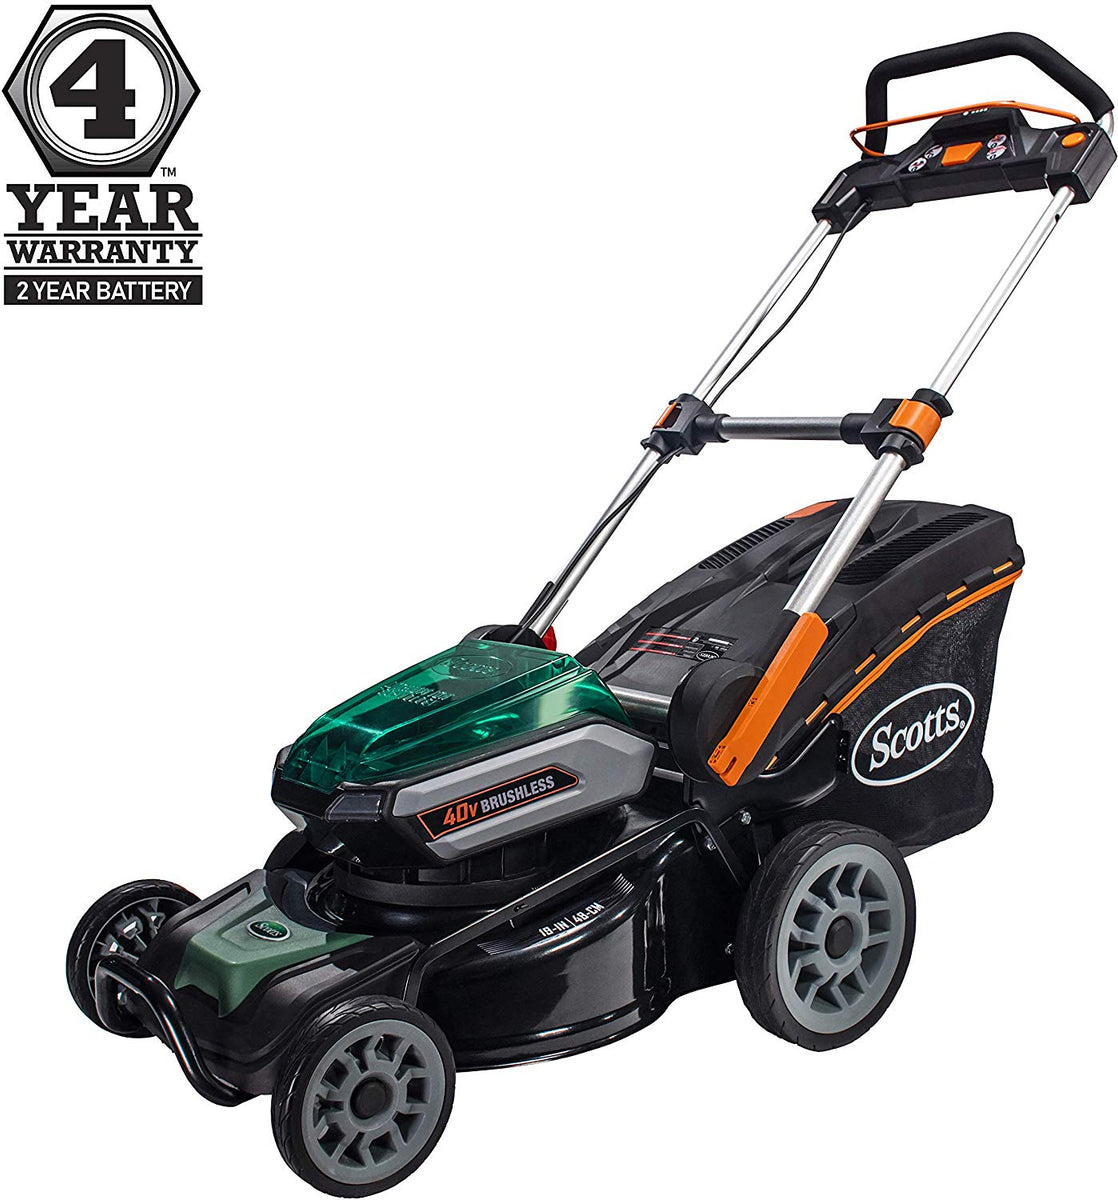  Scotts Outdoor Power Tools 51519S 19-Inch 13-Amp Corded Electric  Lawn Mower : Patio, Lawn & Garden